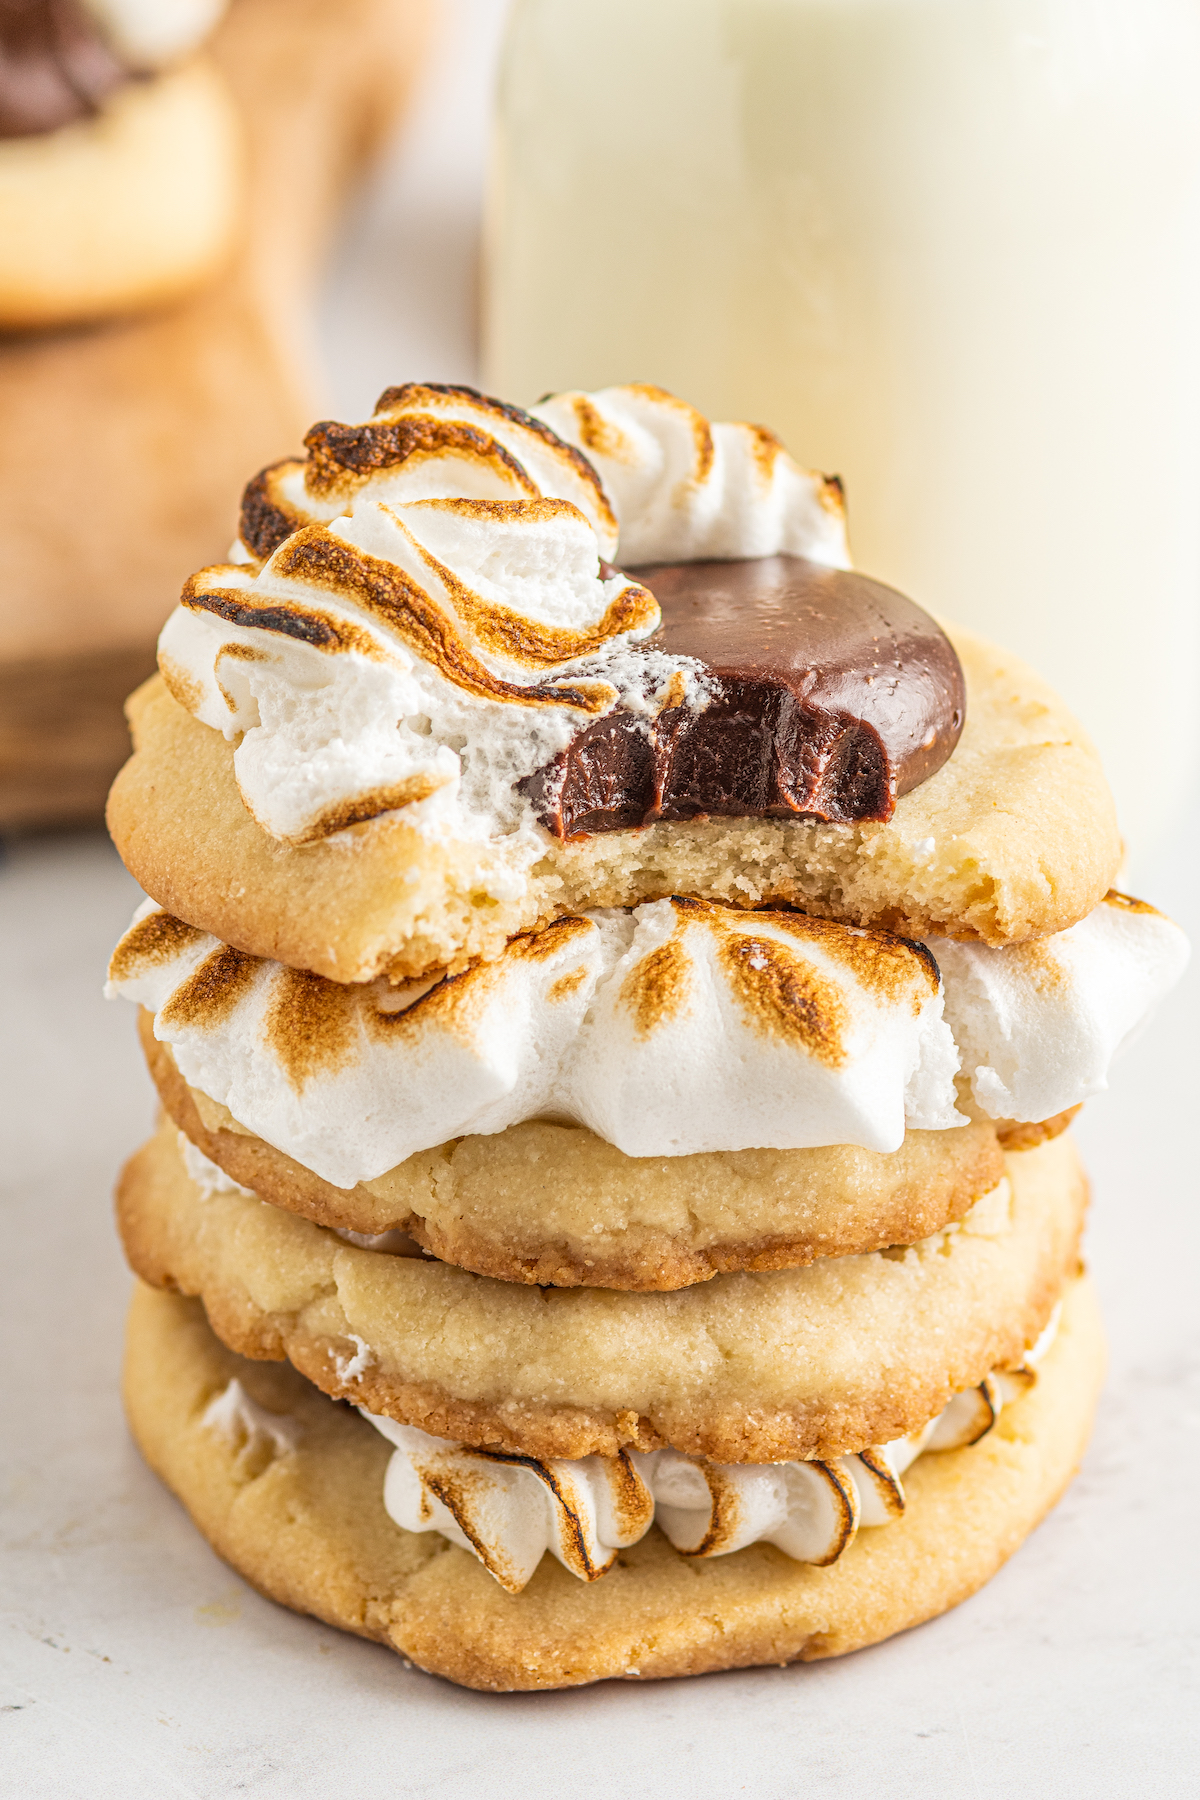 A close-up shot of four s'mores cookies, stacked on top of each other. The top cookie has had a bite taken out of it.